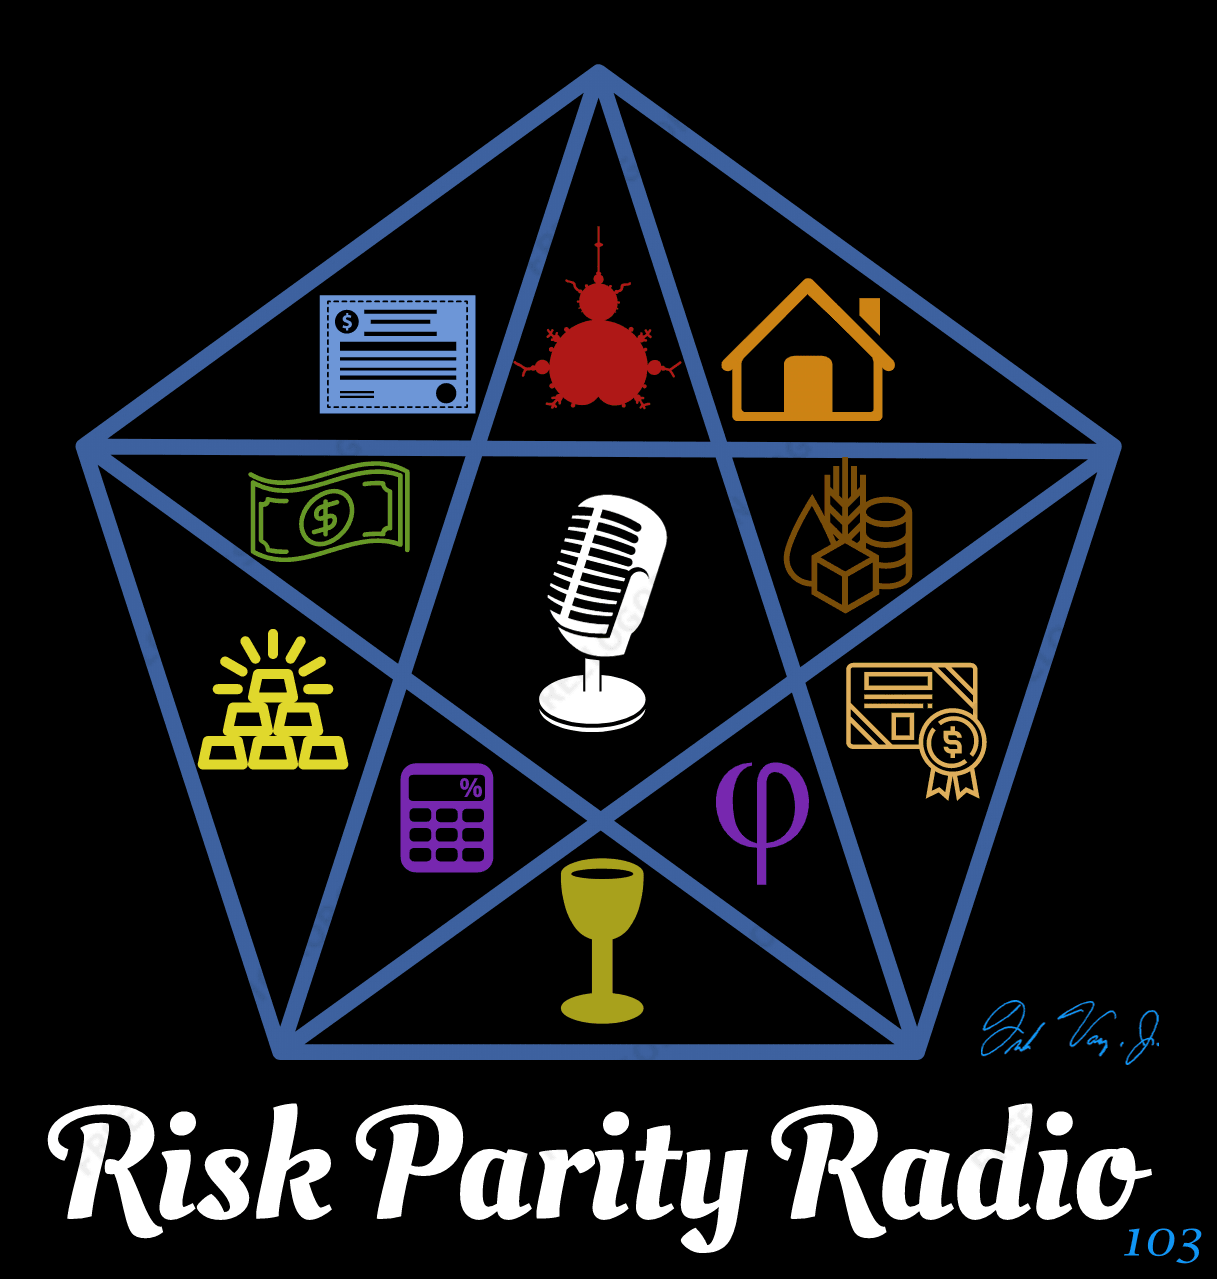 Limited Edition Risk Parity Radio Autographed Print #103